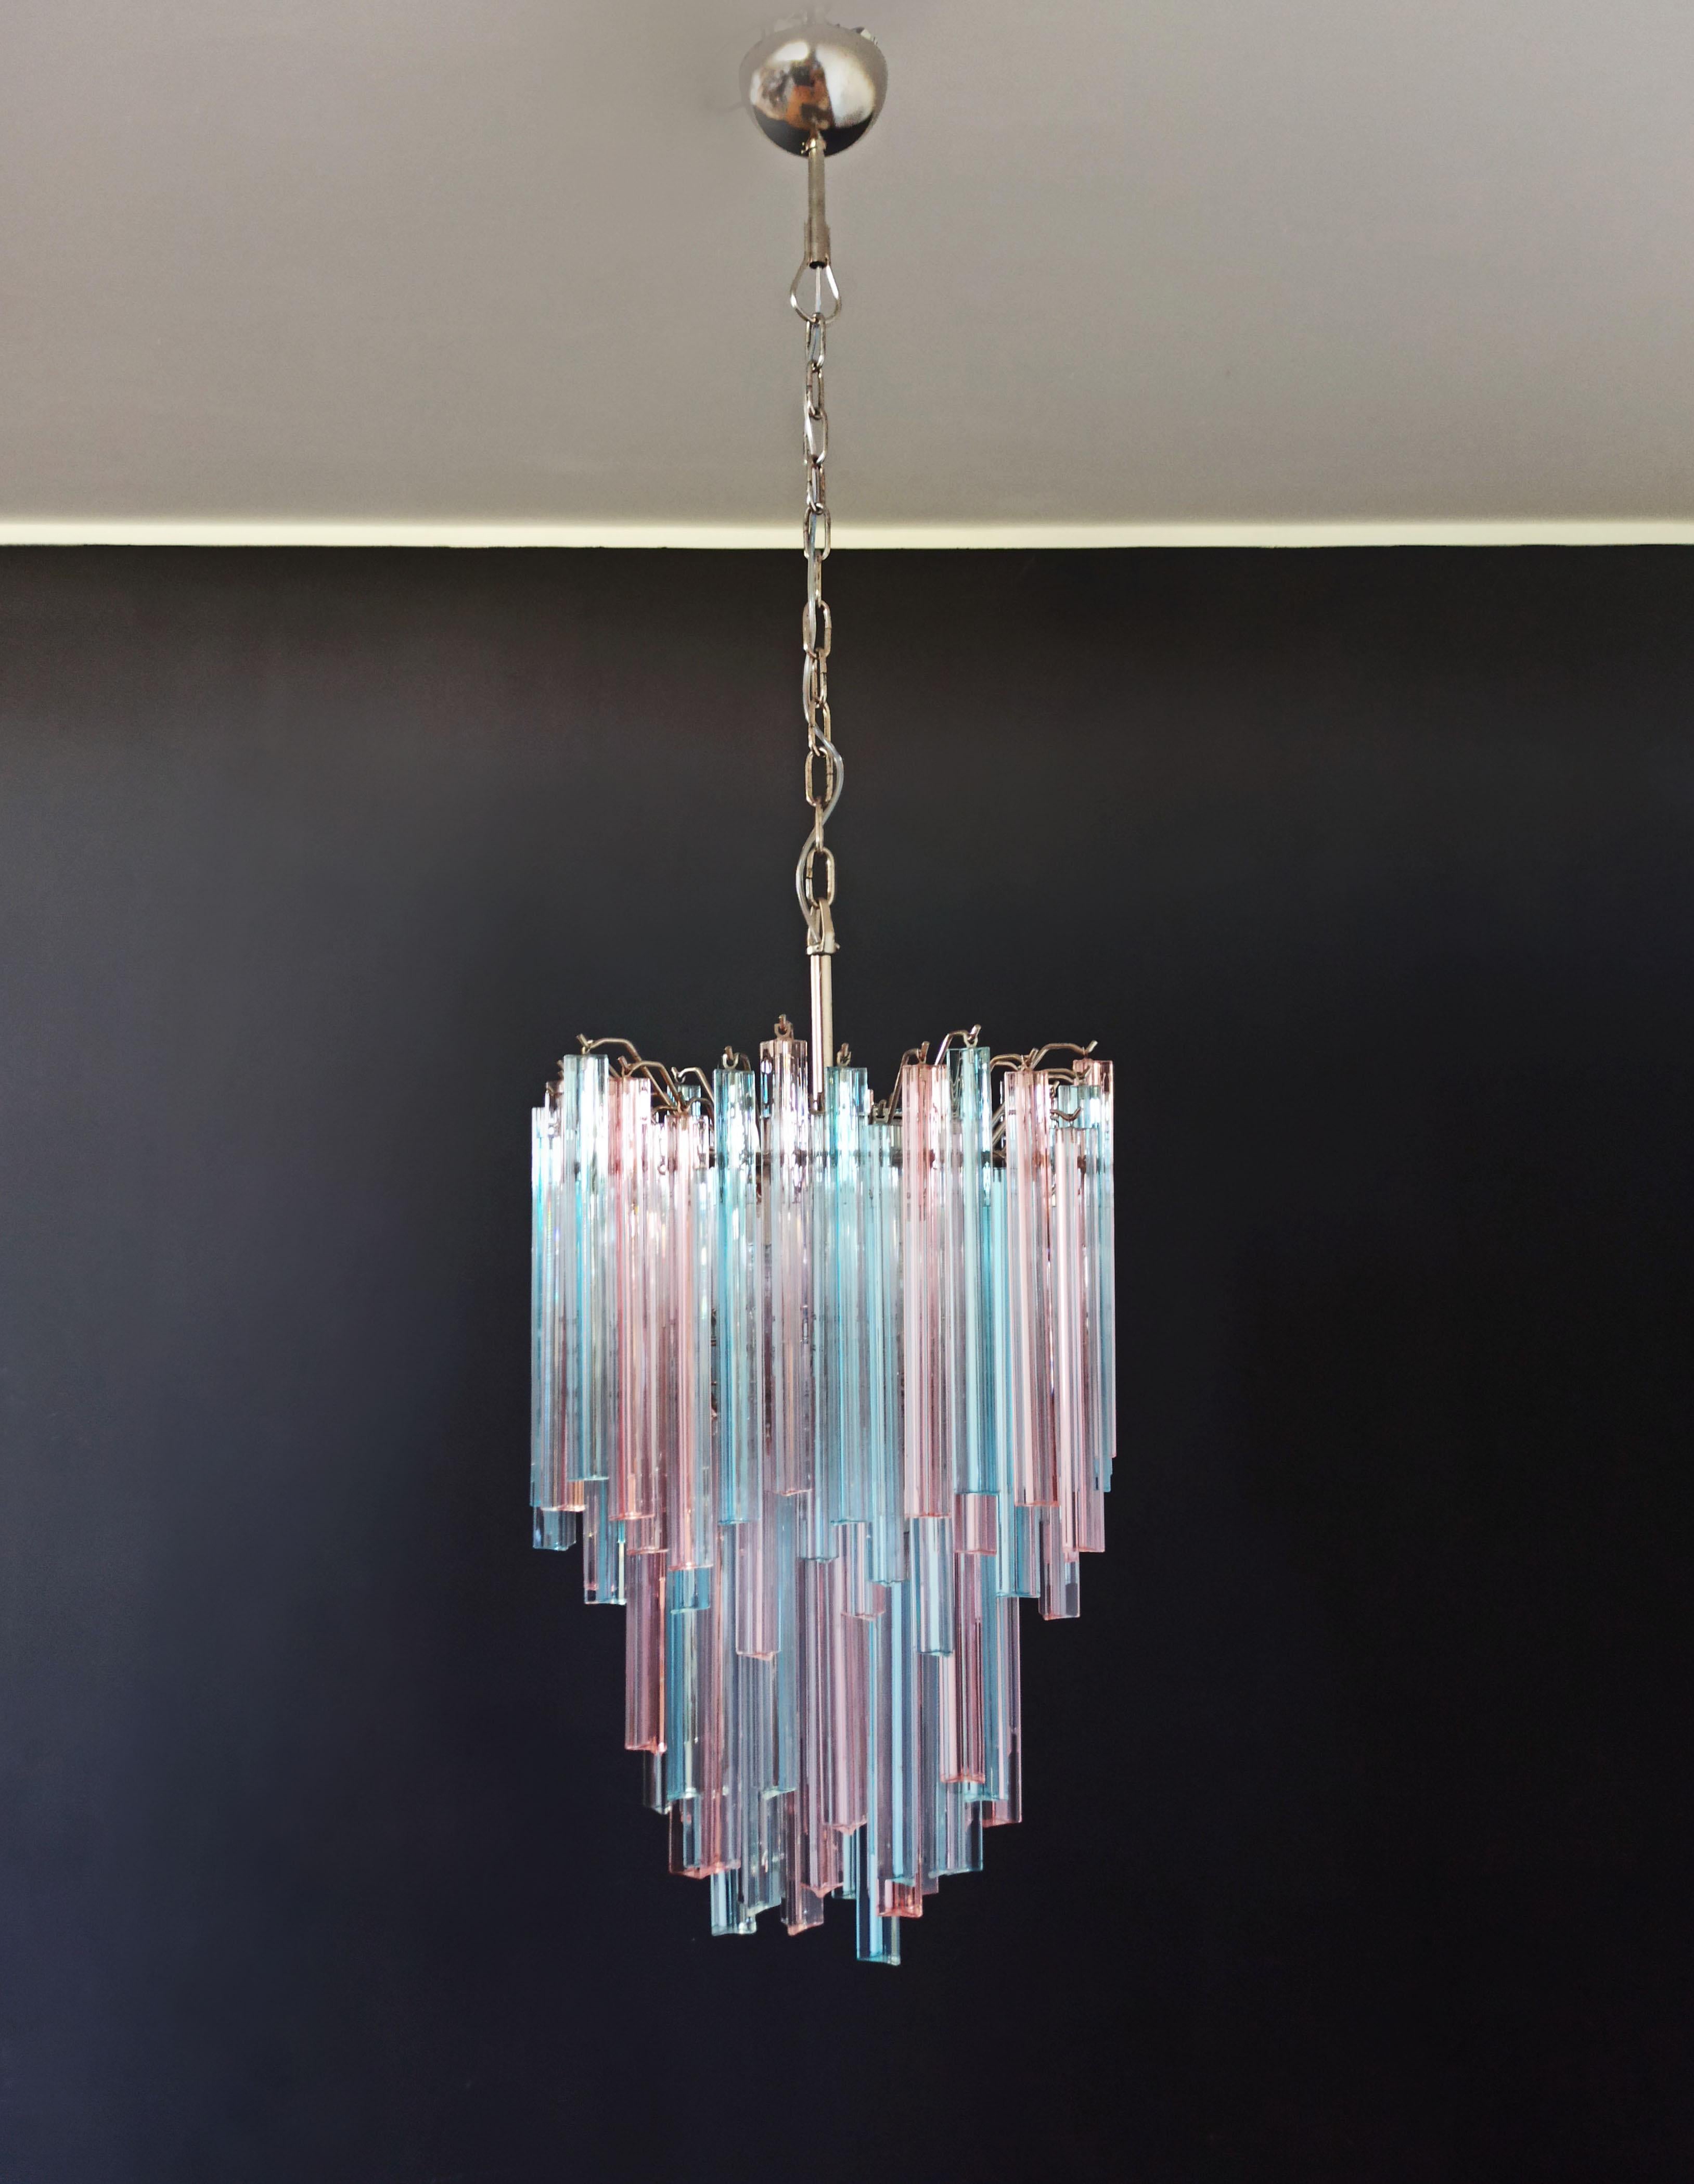 Fantastic vintage Murano chandelier made by 92 Murano blue and pink crystal prism in a nickel metal frame.

Period: Late 20th century

Dimensions: 53.15 inches height (135 cm) with chain; 29.50 inches height (75 cm) without chain; 17.70 inches